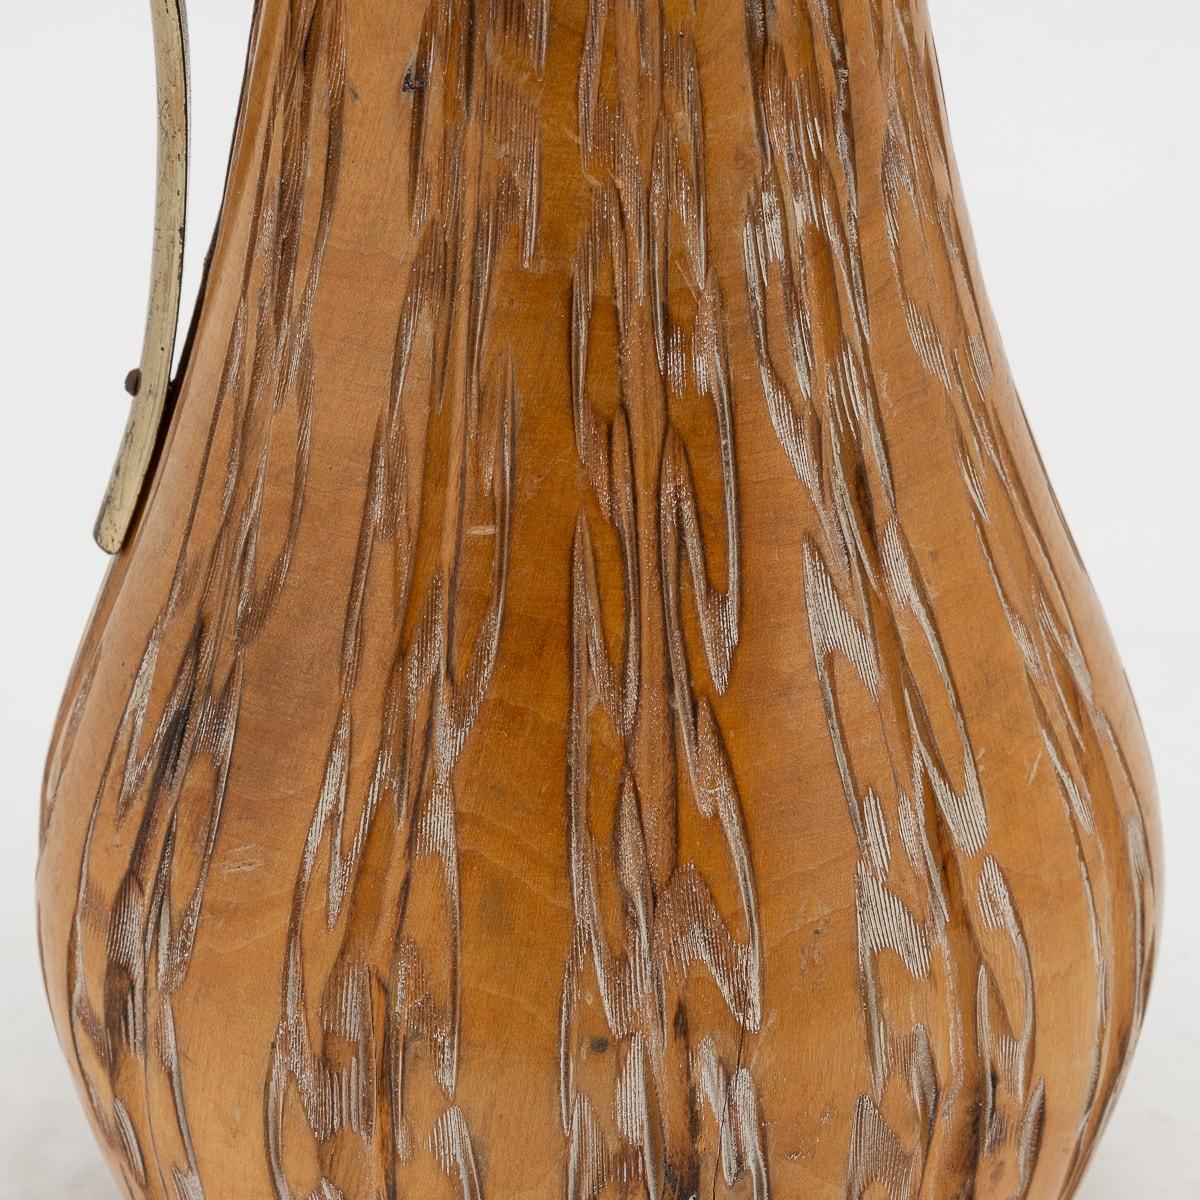 20th Century Italian Carved Wood Flask By Aldo Tura For Macabo c.1960 For Sale 3